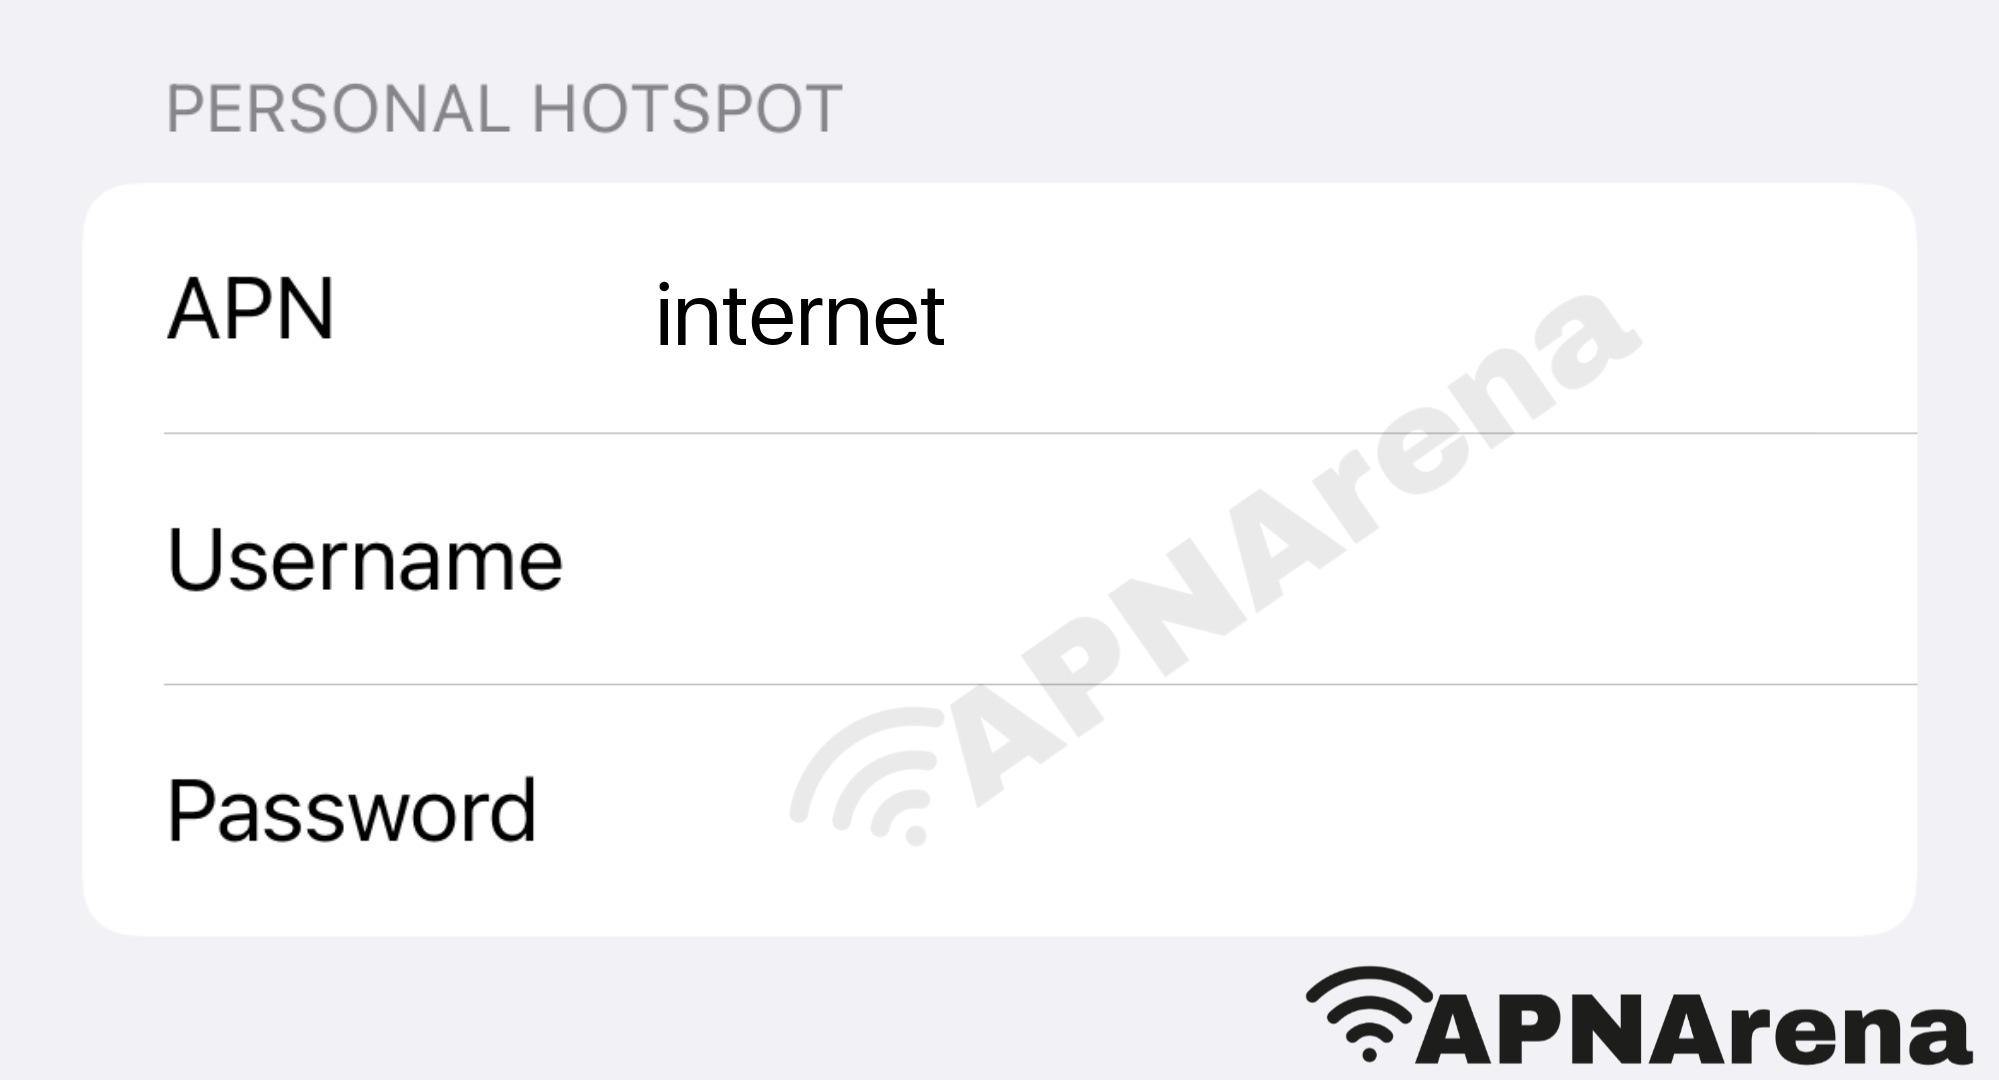 easyGO Wireless Personal Hotspot Settings for iPhone